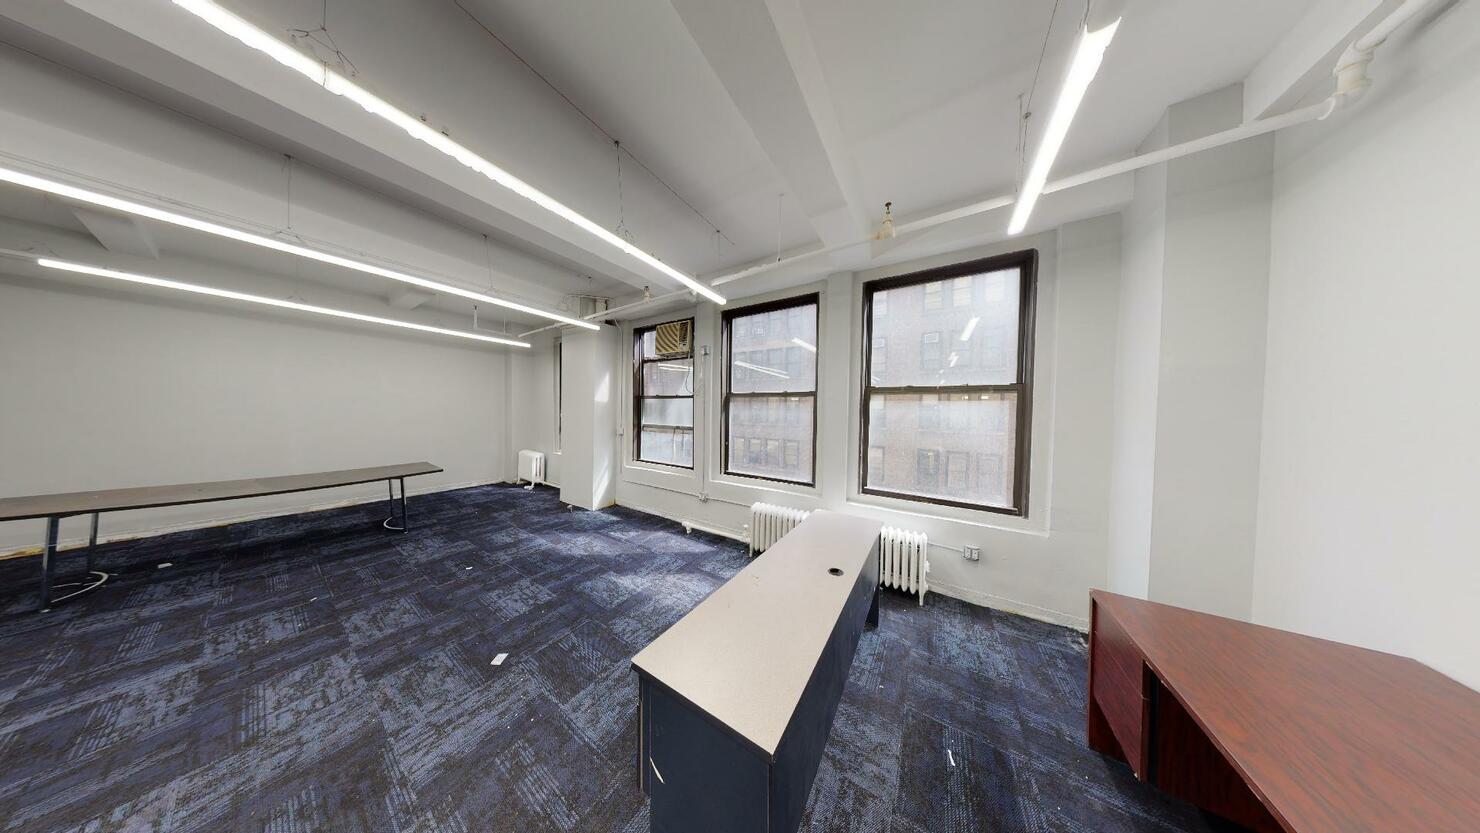 1,800 SF Open-plan Commercial Loft Space for Lease on the 9th Floor of 255 West 36th Street, NYC.